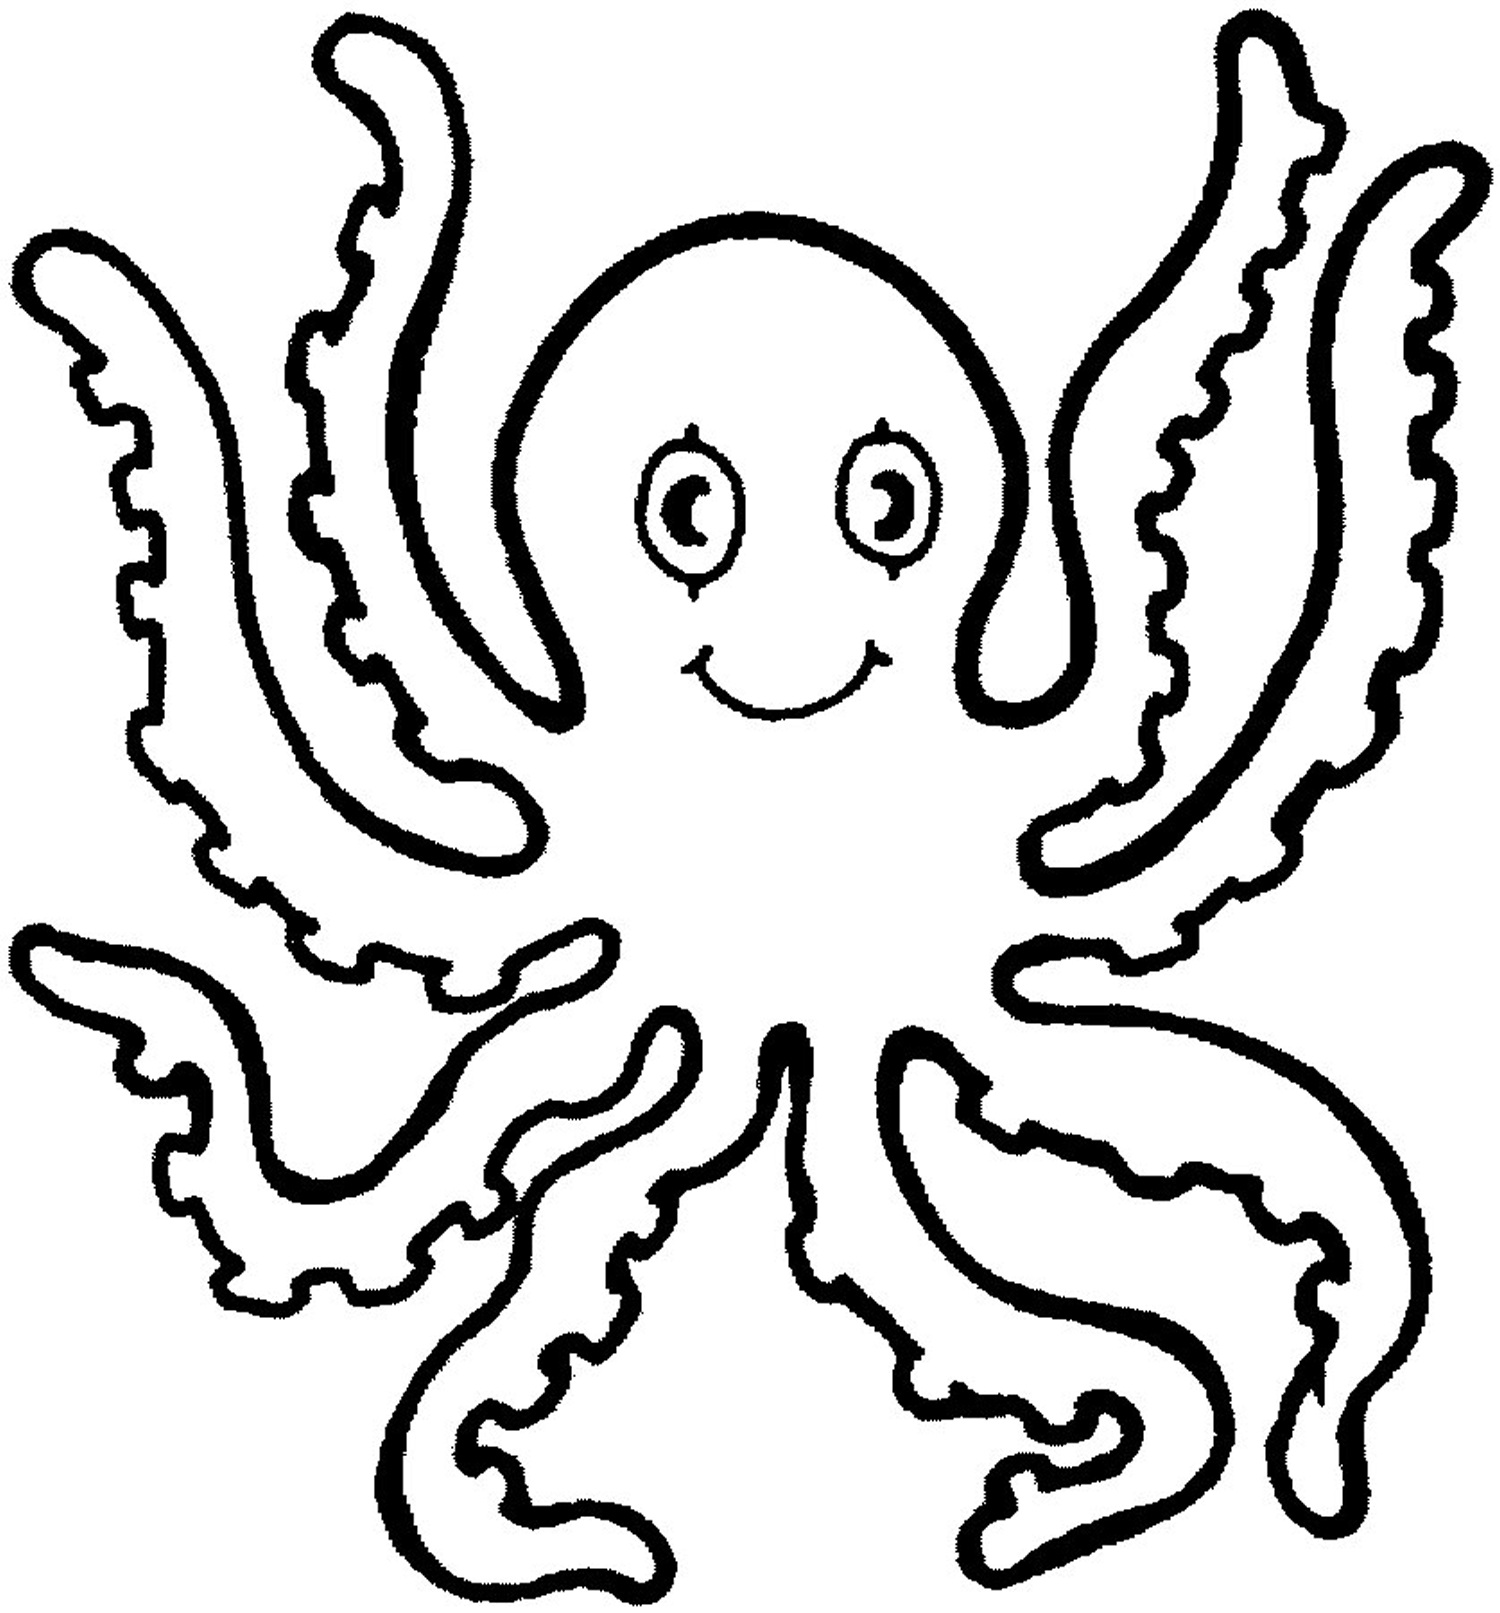 Octopus  black and white drawing octopus clipart